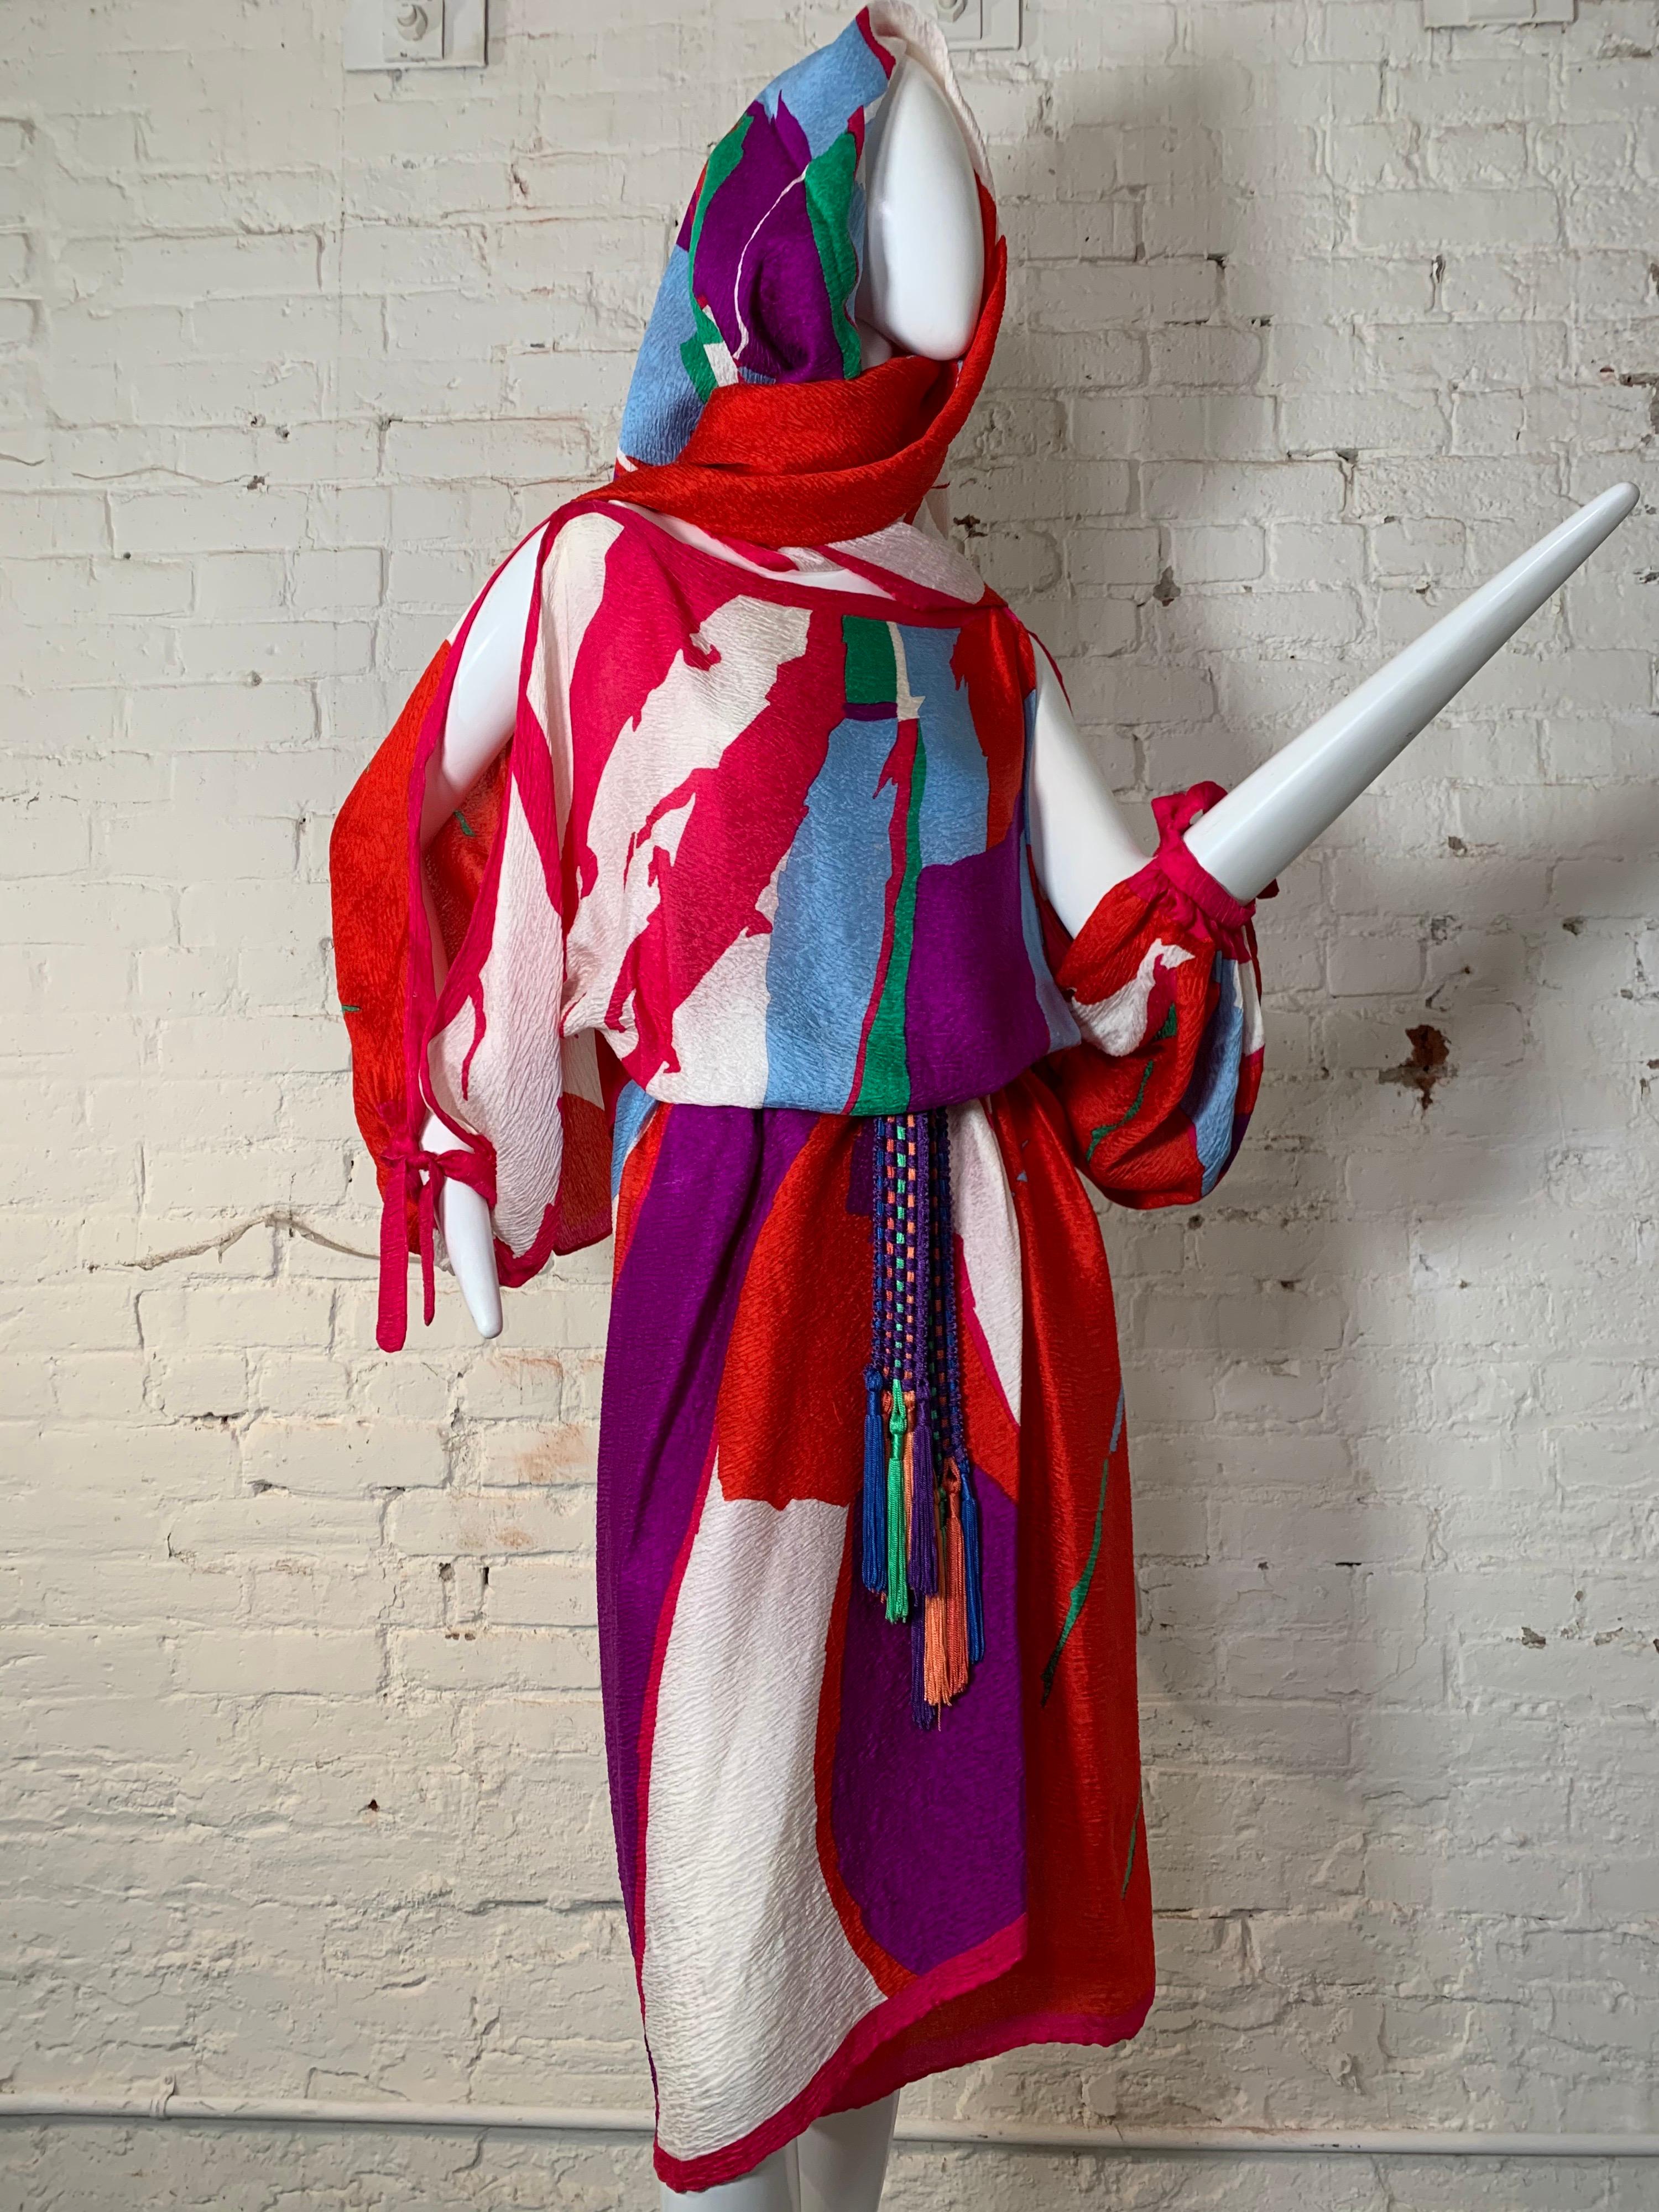 Early 1980s Halston Original abstract printed silk pongee dress and matching large scarf ensemble in red, blue, purple, green and white. Dress has balloon sleeves that are open from shoulder to gathered cuff. Included is a Yves Saint Laurent braided